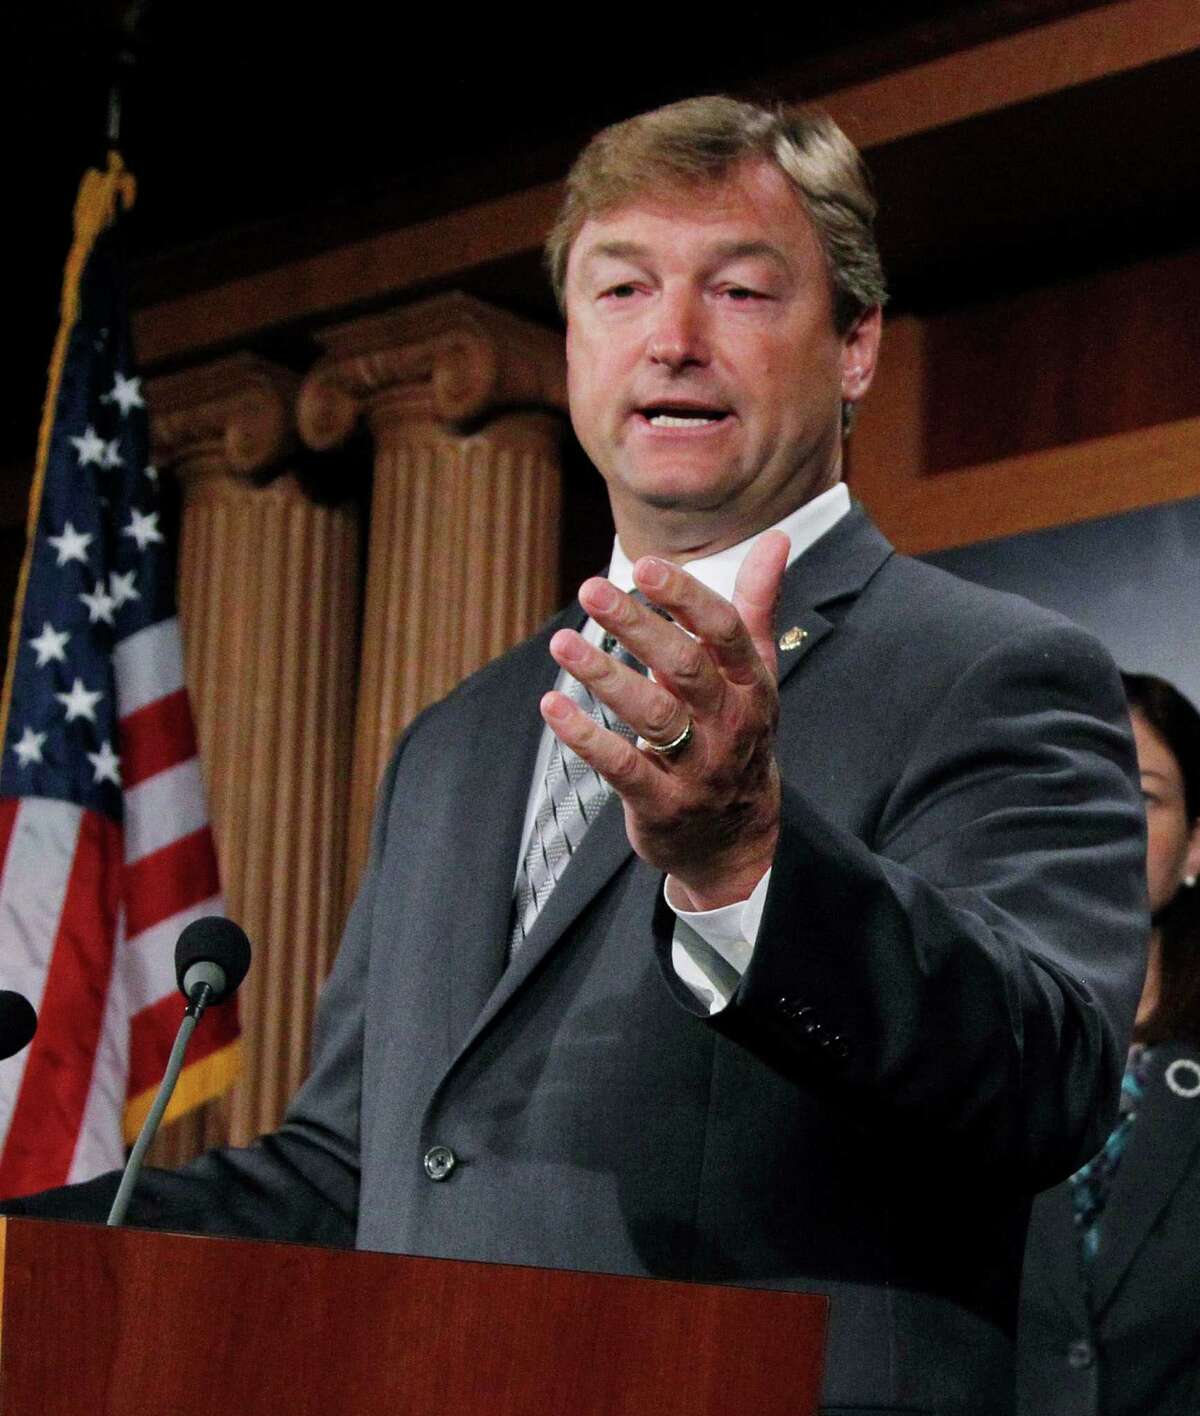 FILE - In this Sept. 8, 2011, file photo, Sen. Dean Heller, R-Nev., speaks during a news conference on Capitol Hill in Washington. Major gay rights legislation is set to clear the first hurdle in the U. S Senate Monday. Republican Sen. Dean Heller of Nevada announced his support on Monday, saying in a statement that the measure âraises the federal standards to match what we have come to expect in Nevada, which is that discrimination must not be tolerated under any circumstance.â (AP Photo/Manuel Balce Ceneta, File)